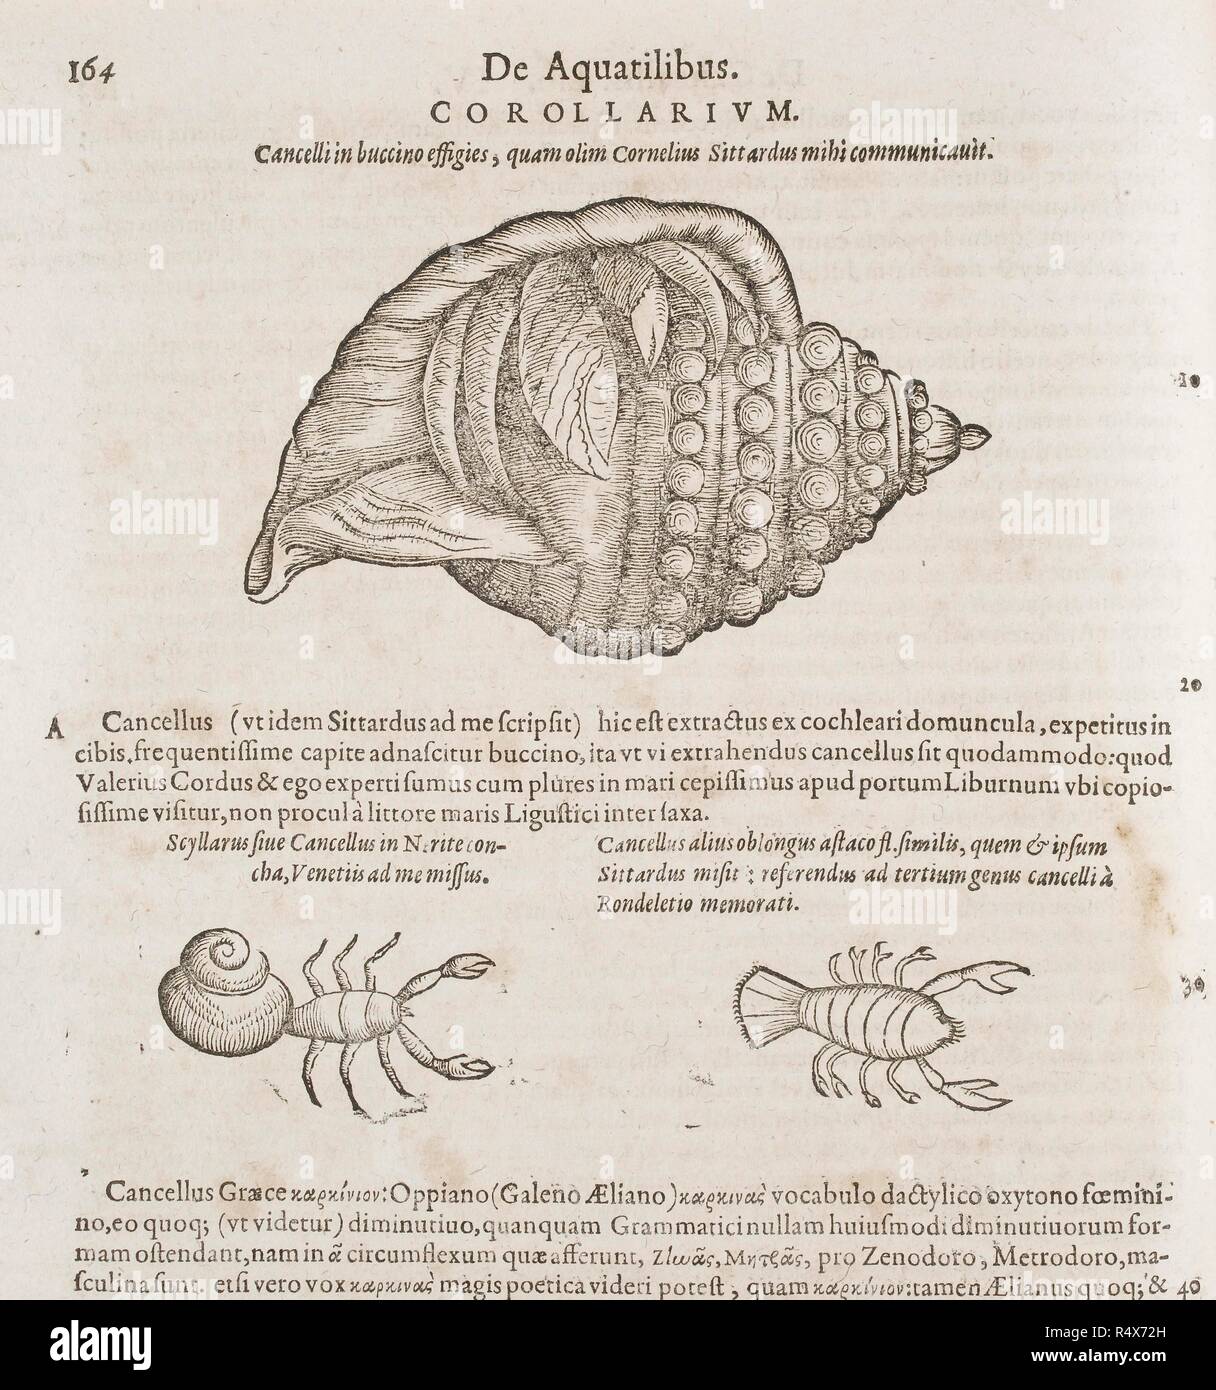 Shell and crabs. C. Gesneri ... historiÃ¦ insectorum libellus. Shell and crabs. Image taken from: C. Gesneri ... historiÃ¦ insectorum libellus, qui est de scorpione. Per C. Wolphium ... collectus, etc. . Source: 460.c.6, p.164. Stock Photo